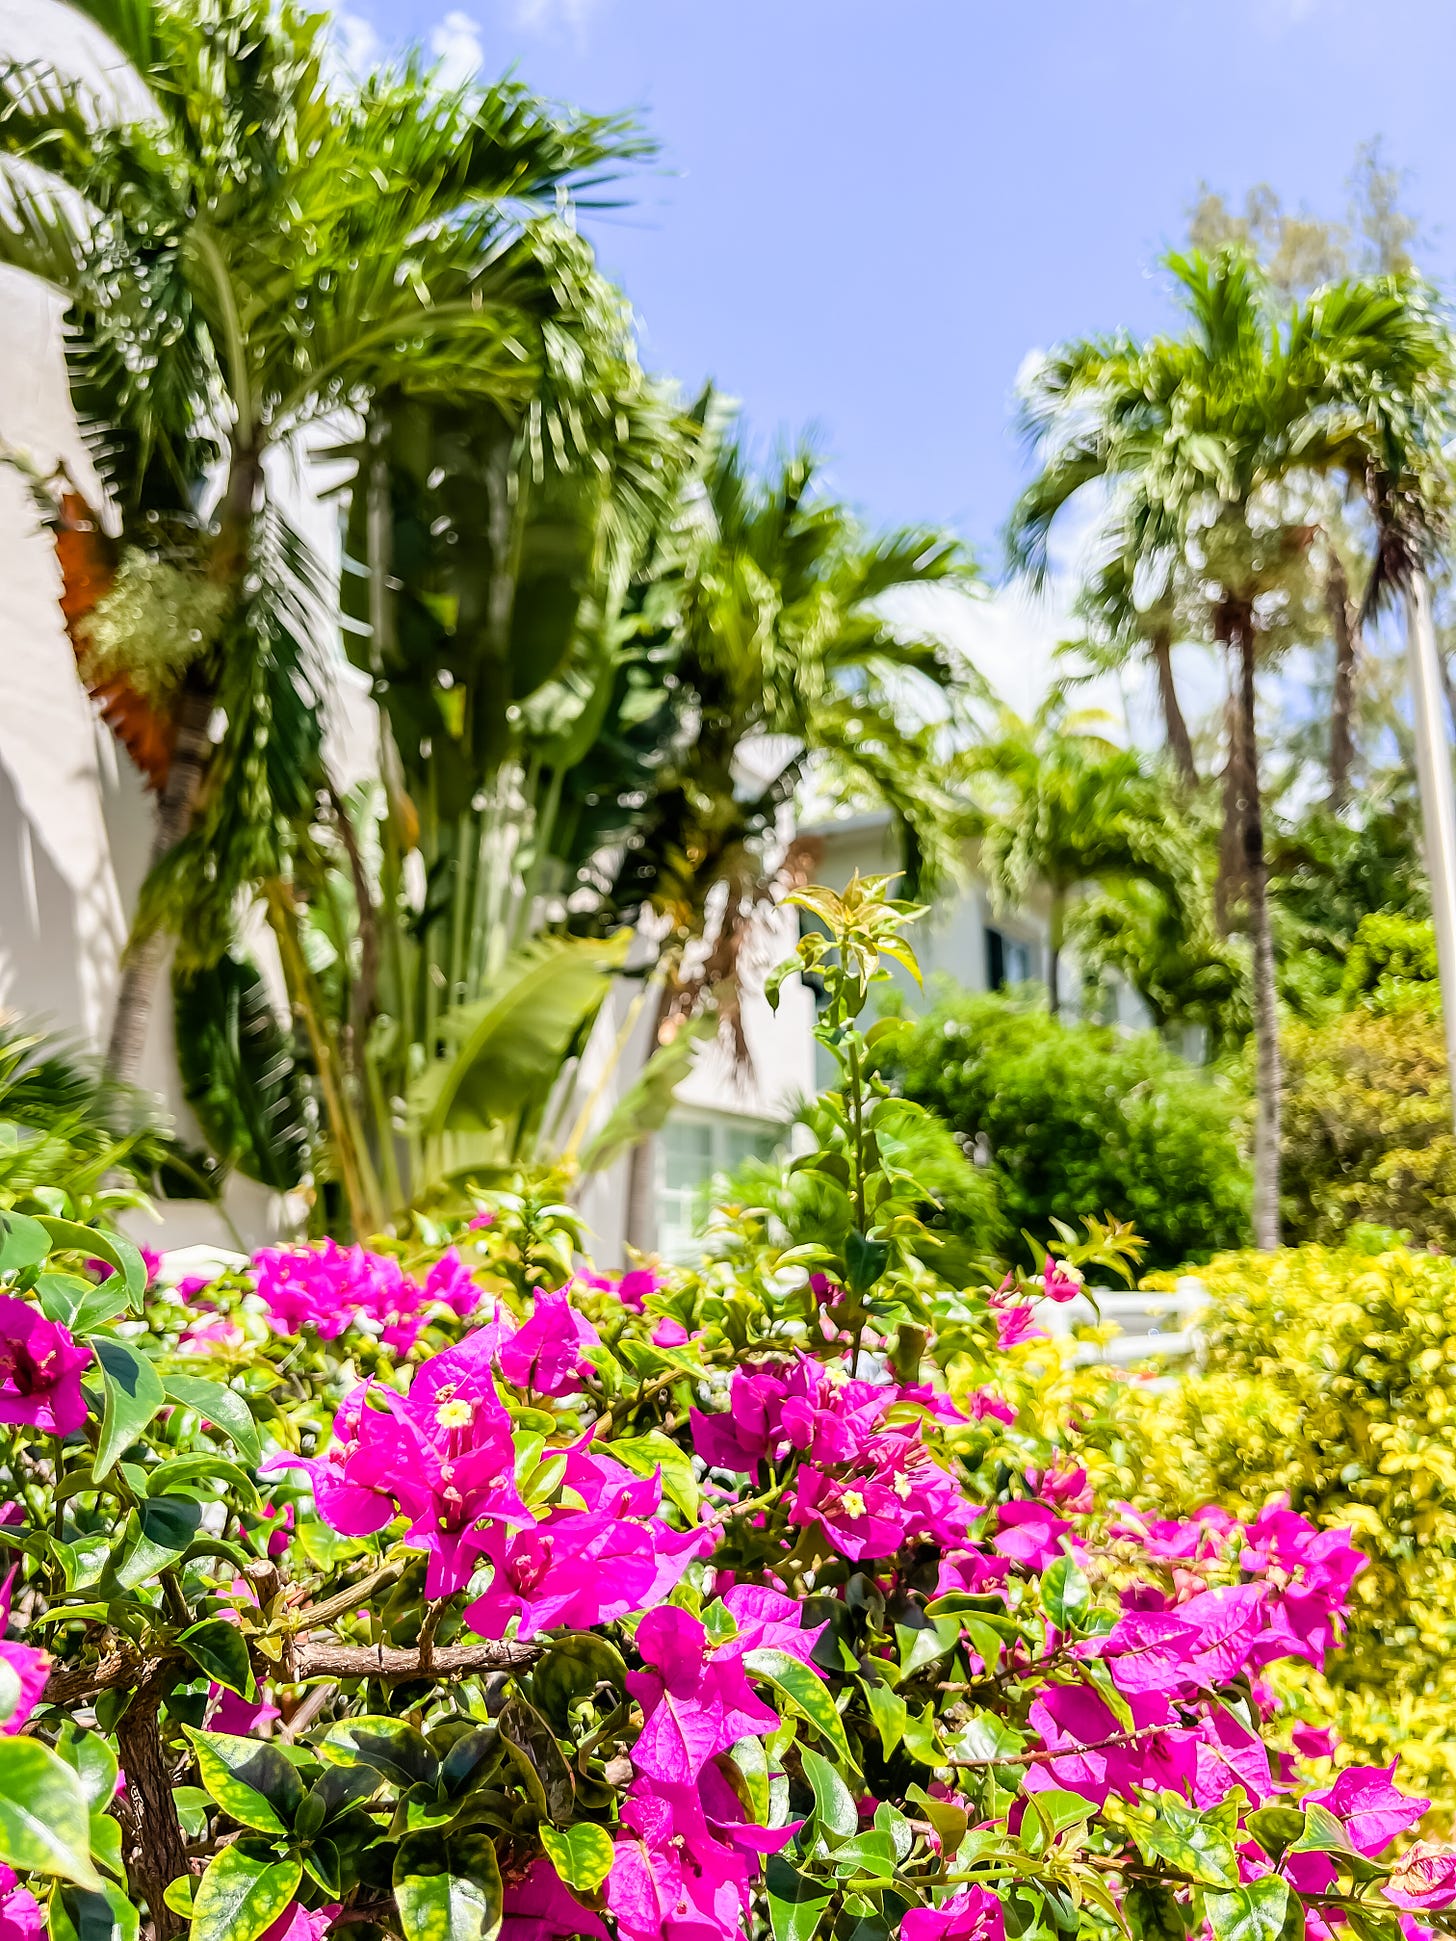 Close-up of magenta flowers in a bush lining a white apartment building with two-story palm trees in the background and a bright sunny day.